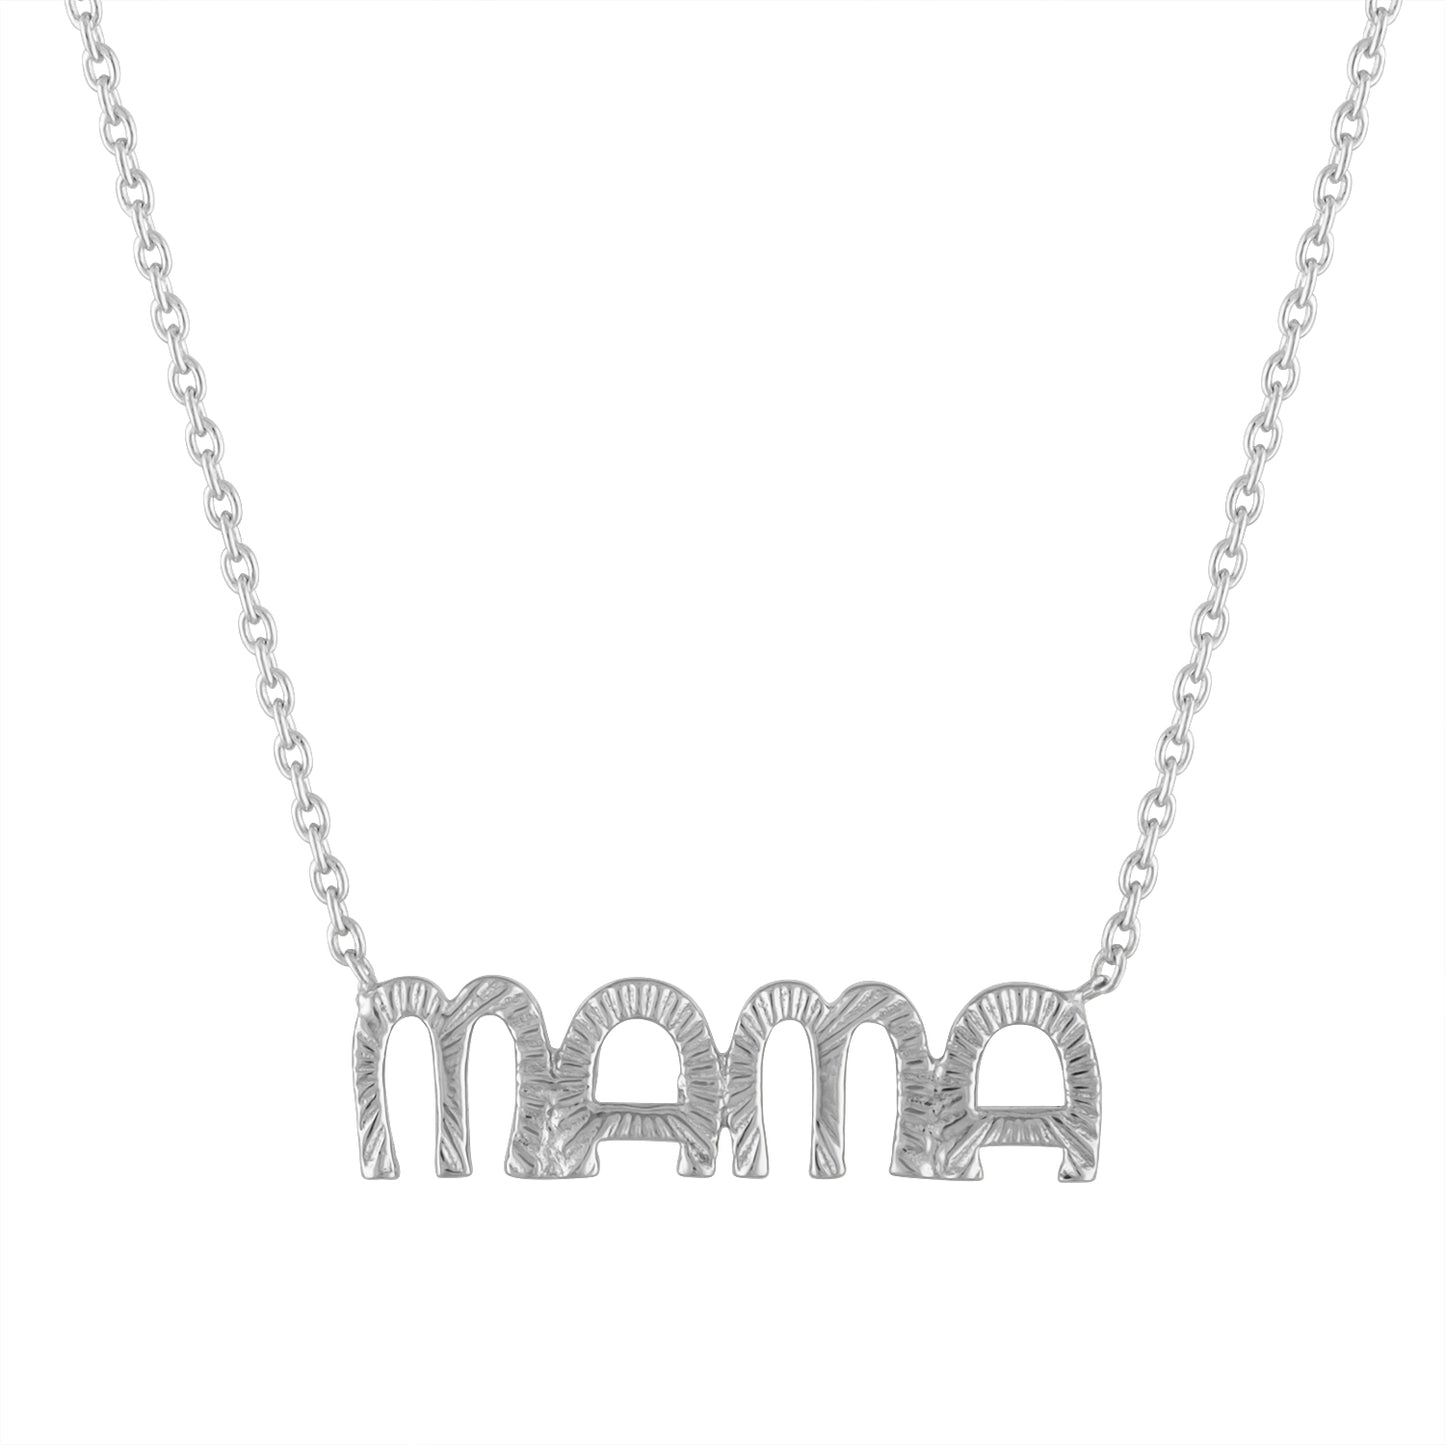 White gold mama necklace with fluting.